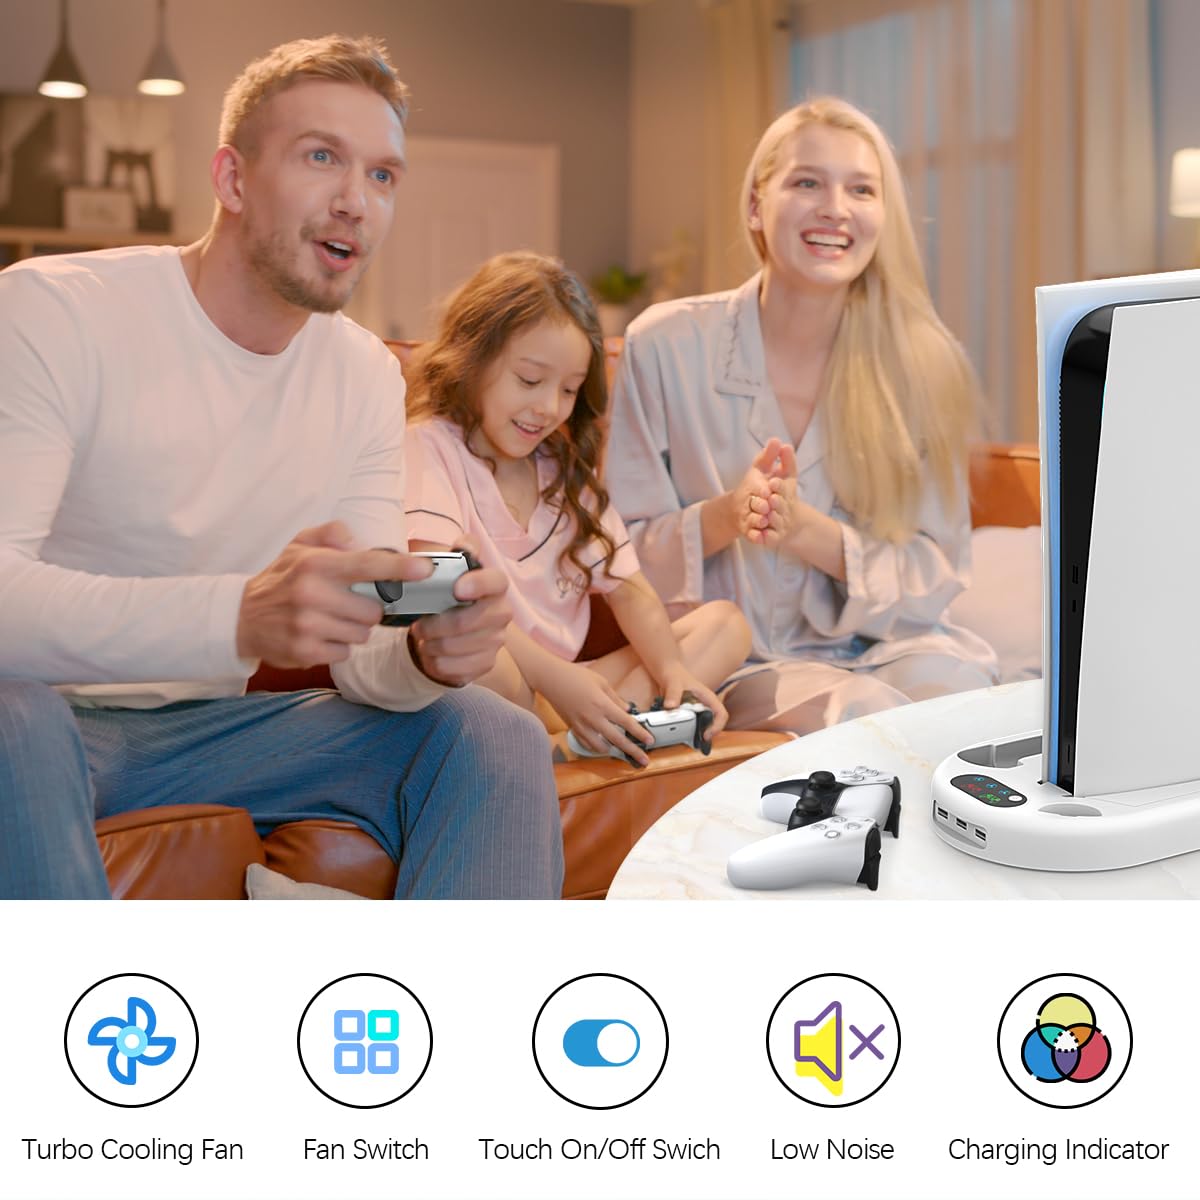 PS5 Stand Cooling Station with Dual PS5 Charging Station Playstation 5 Console Cooler for ps5 Host Docking Station with Cooling Fan PS5 Controller Charger Fast Charging PS 5 Disc & Digital White